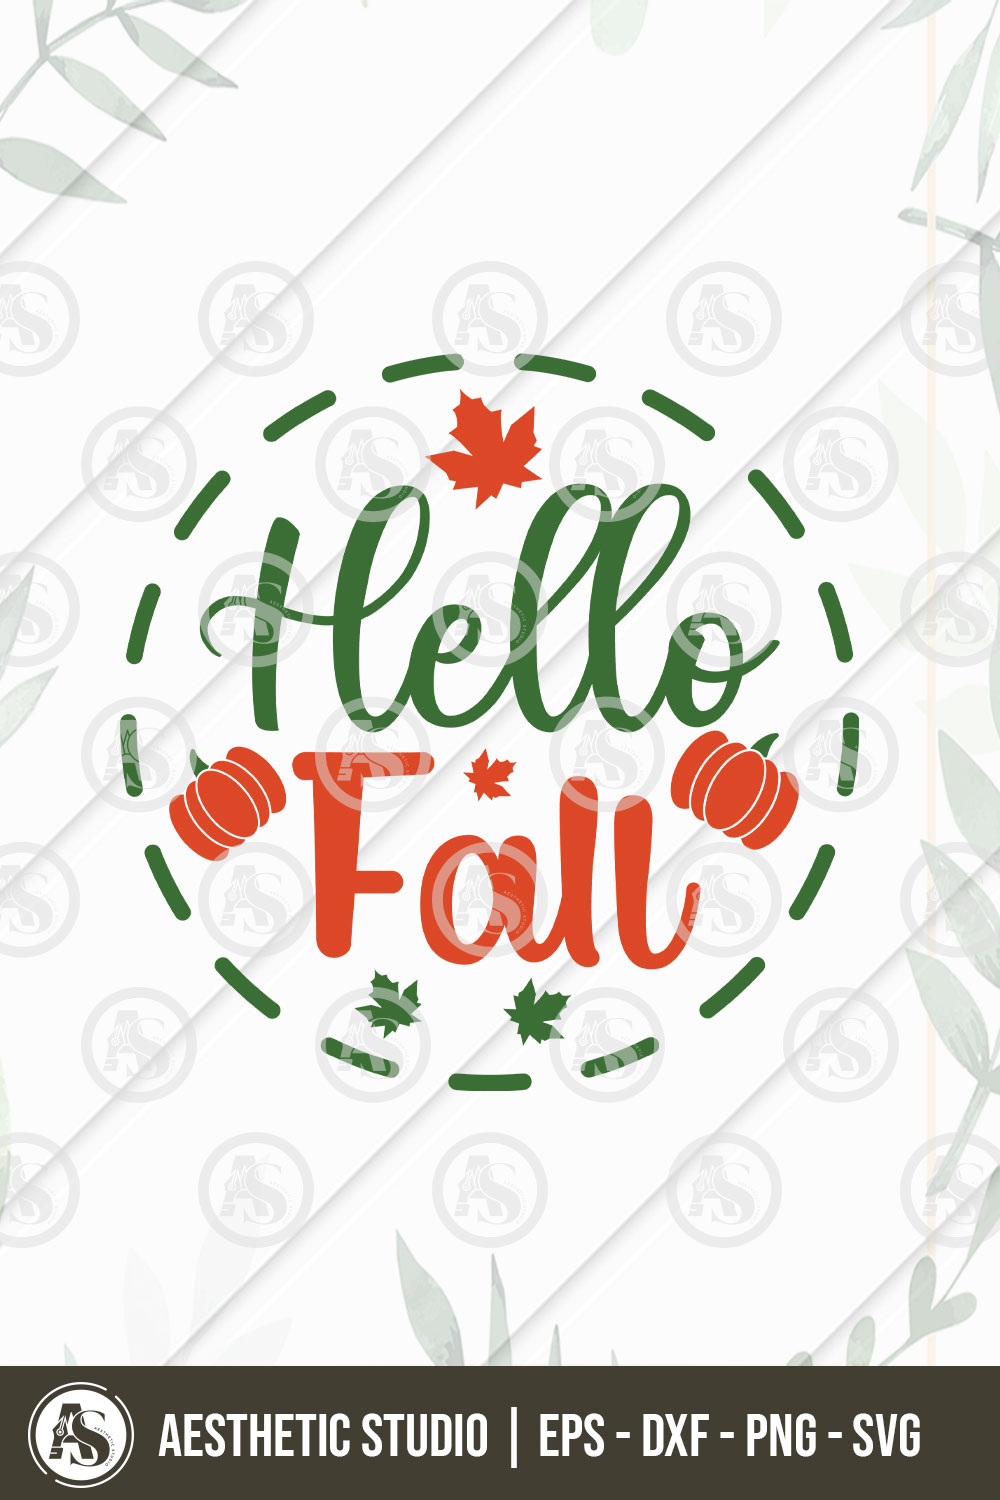 Hello Fall Svg, Thanksgiving Day, Thanksgiving Svg, Fall Svg, Pumpkin, Thanksgiving Shirt Png Cut Files, Turkey svg, Gobble Svg, Pumpkin Spice, Fall Leaves Svg, Autumn Svg, Grateful svg, Thanksgiving Quote, Cut Files for Cricut, Thanksgiving Sayings, pinterest preview image.